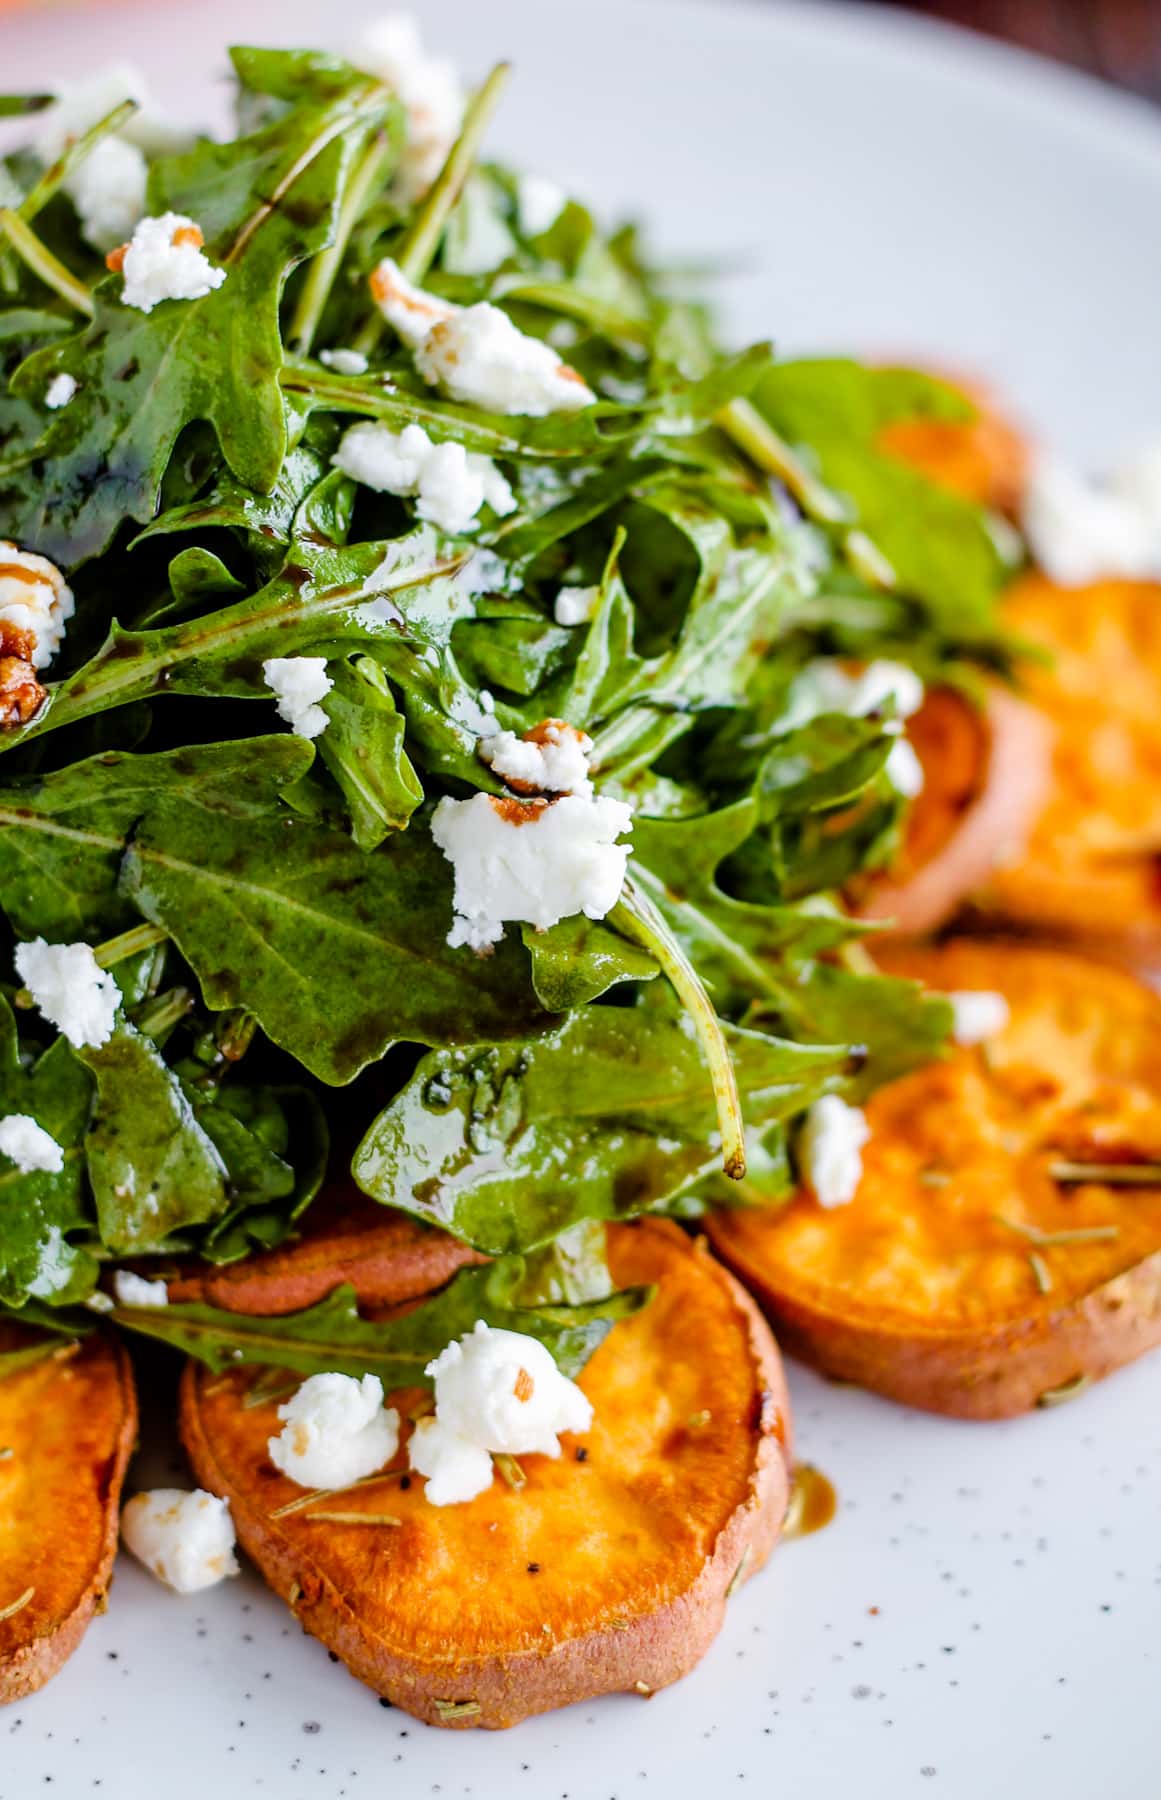 Arugula salad topped with crumbled goat cheese served on top of roasted sweet potatoes and drizzled with balsamic glaze